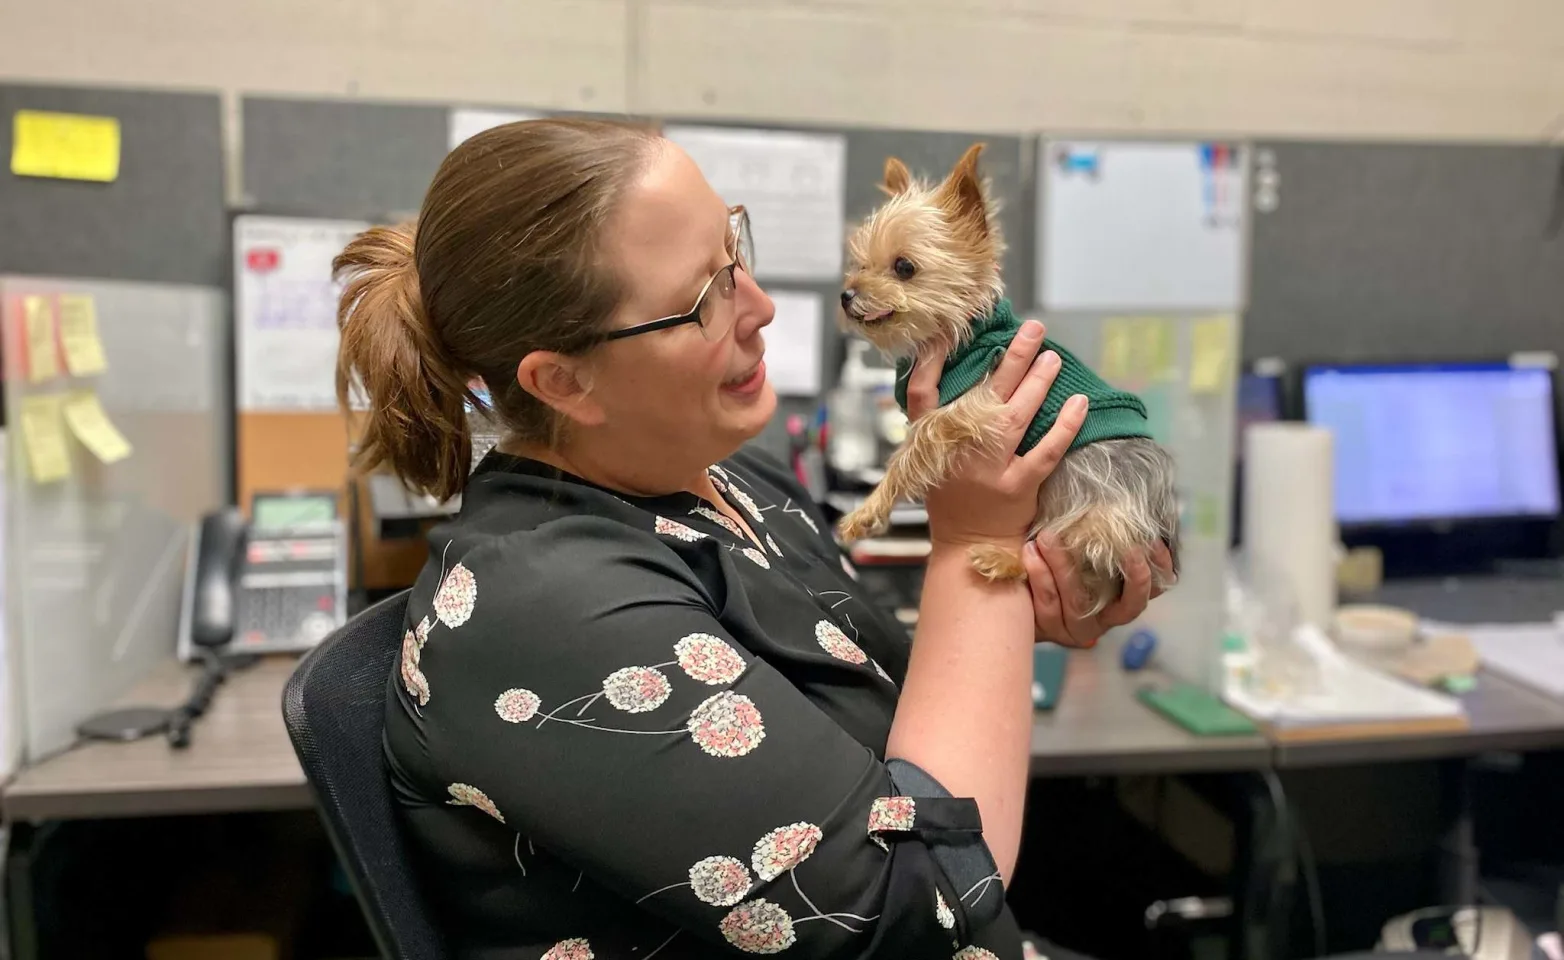 Veterinary social worker holding a little dog